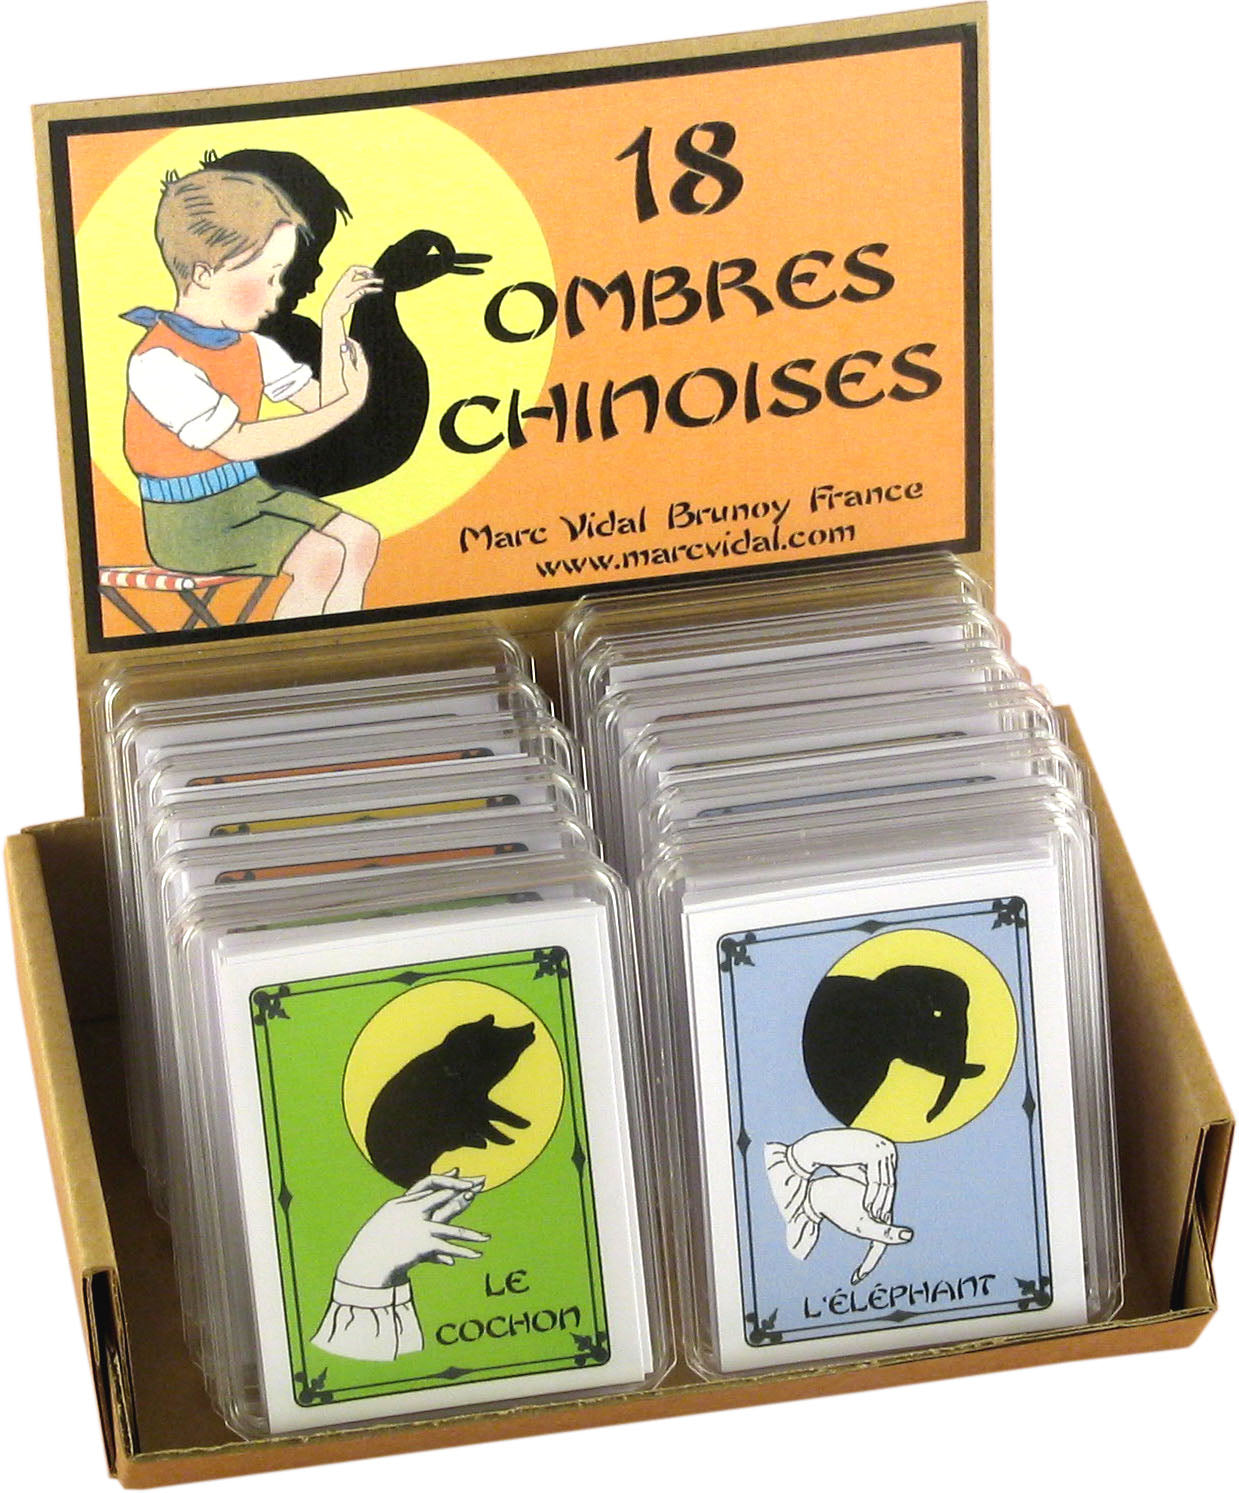 18 OMBRES CHINOISES